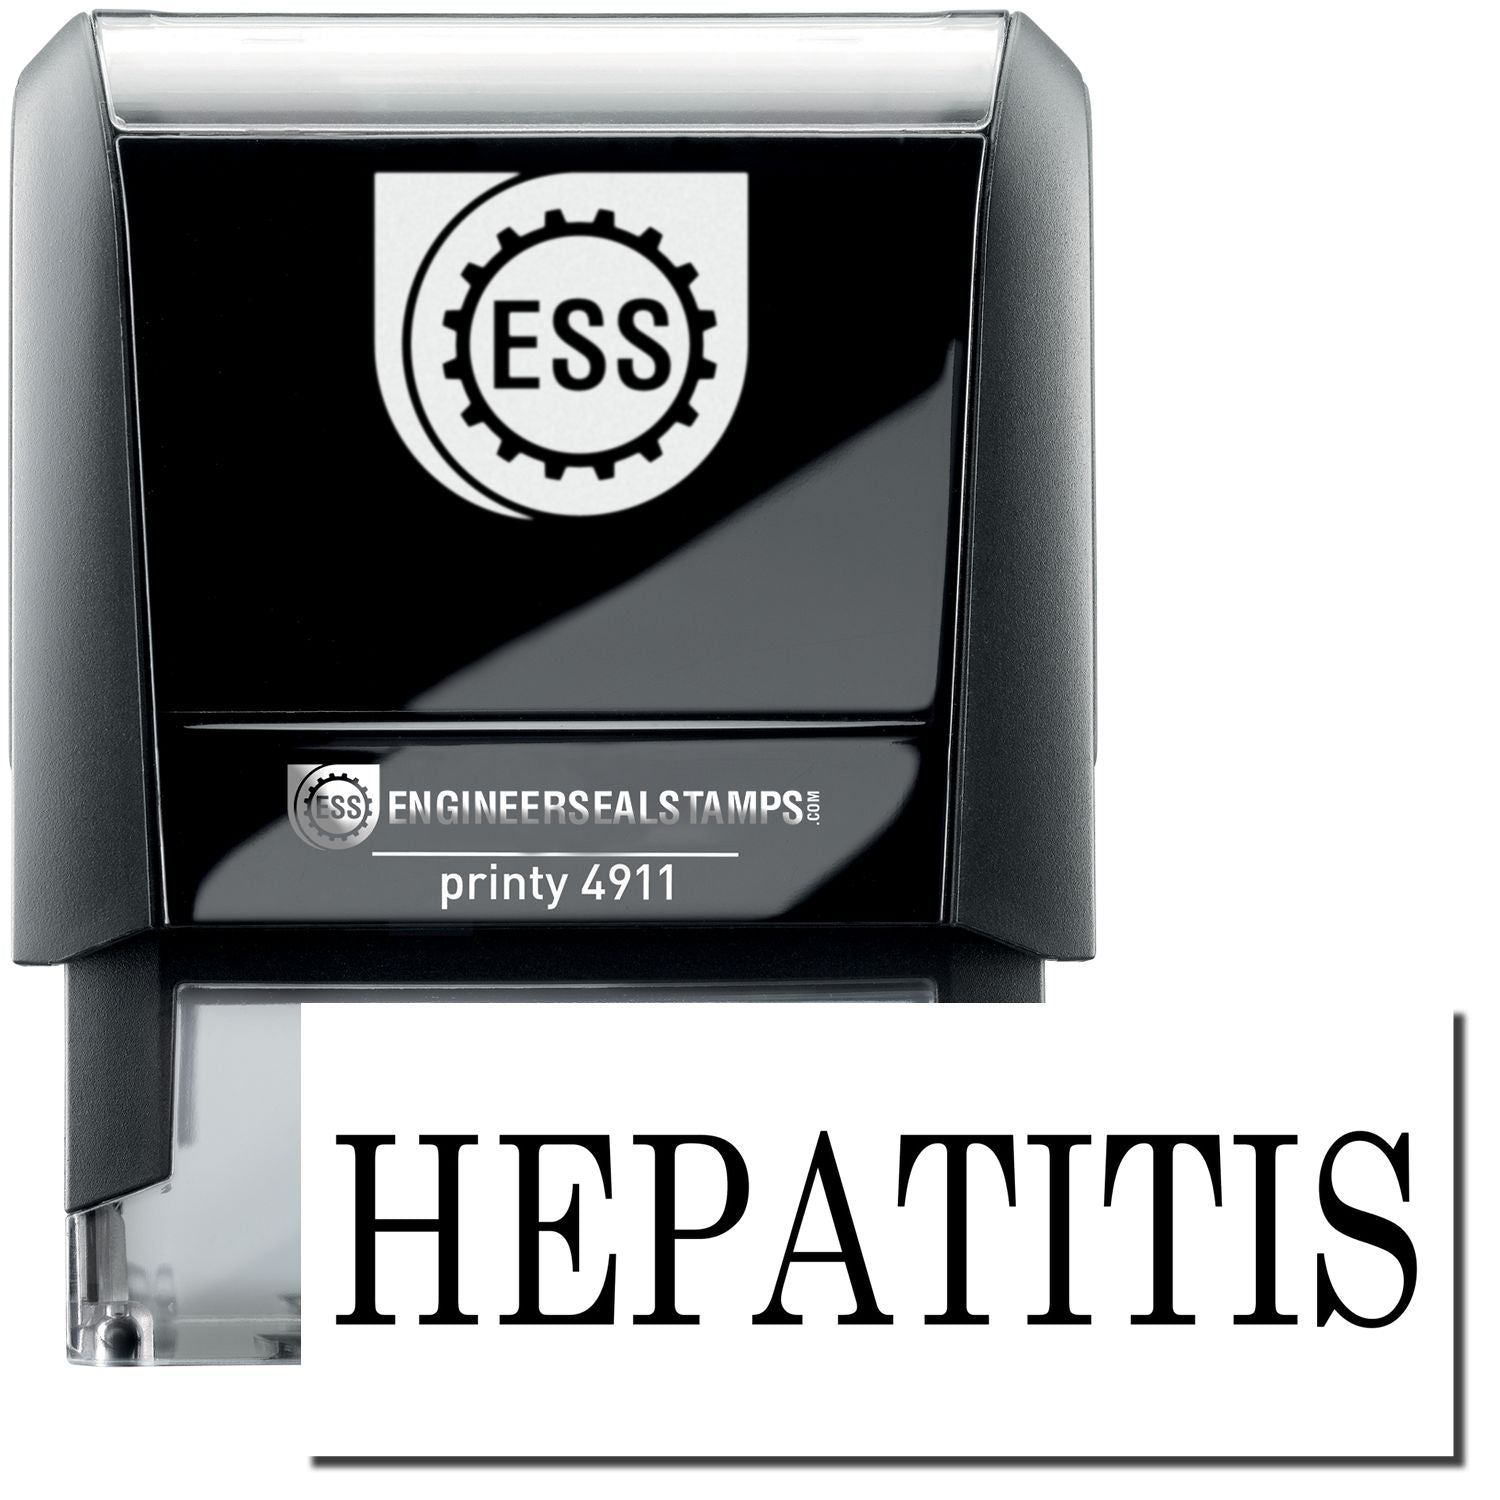 A self-inking stamp with a stamped image showing how the text "HEPATITIS" is displayed after stamping.